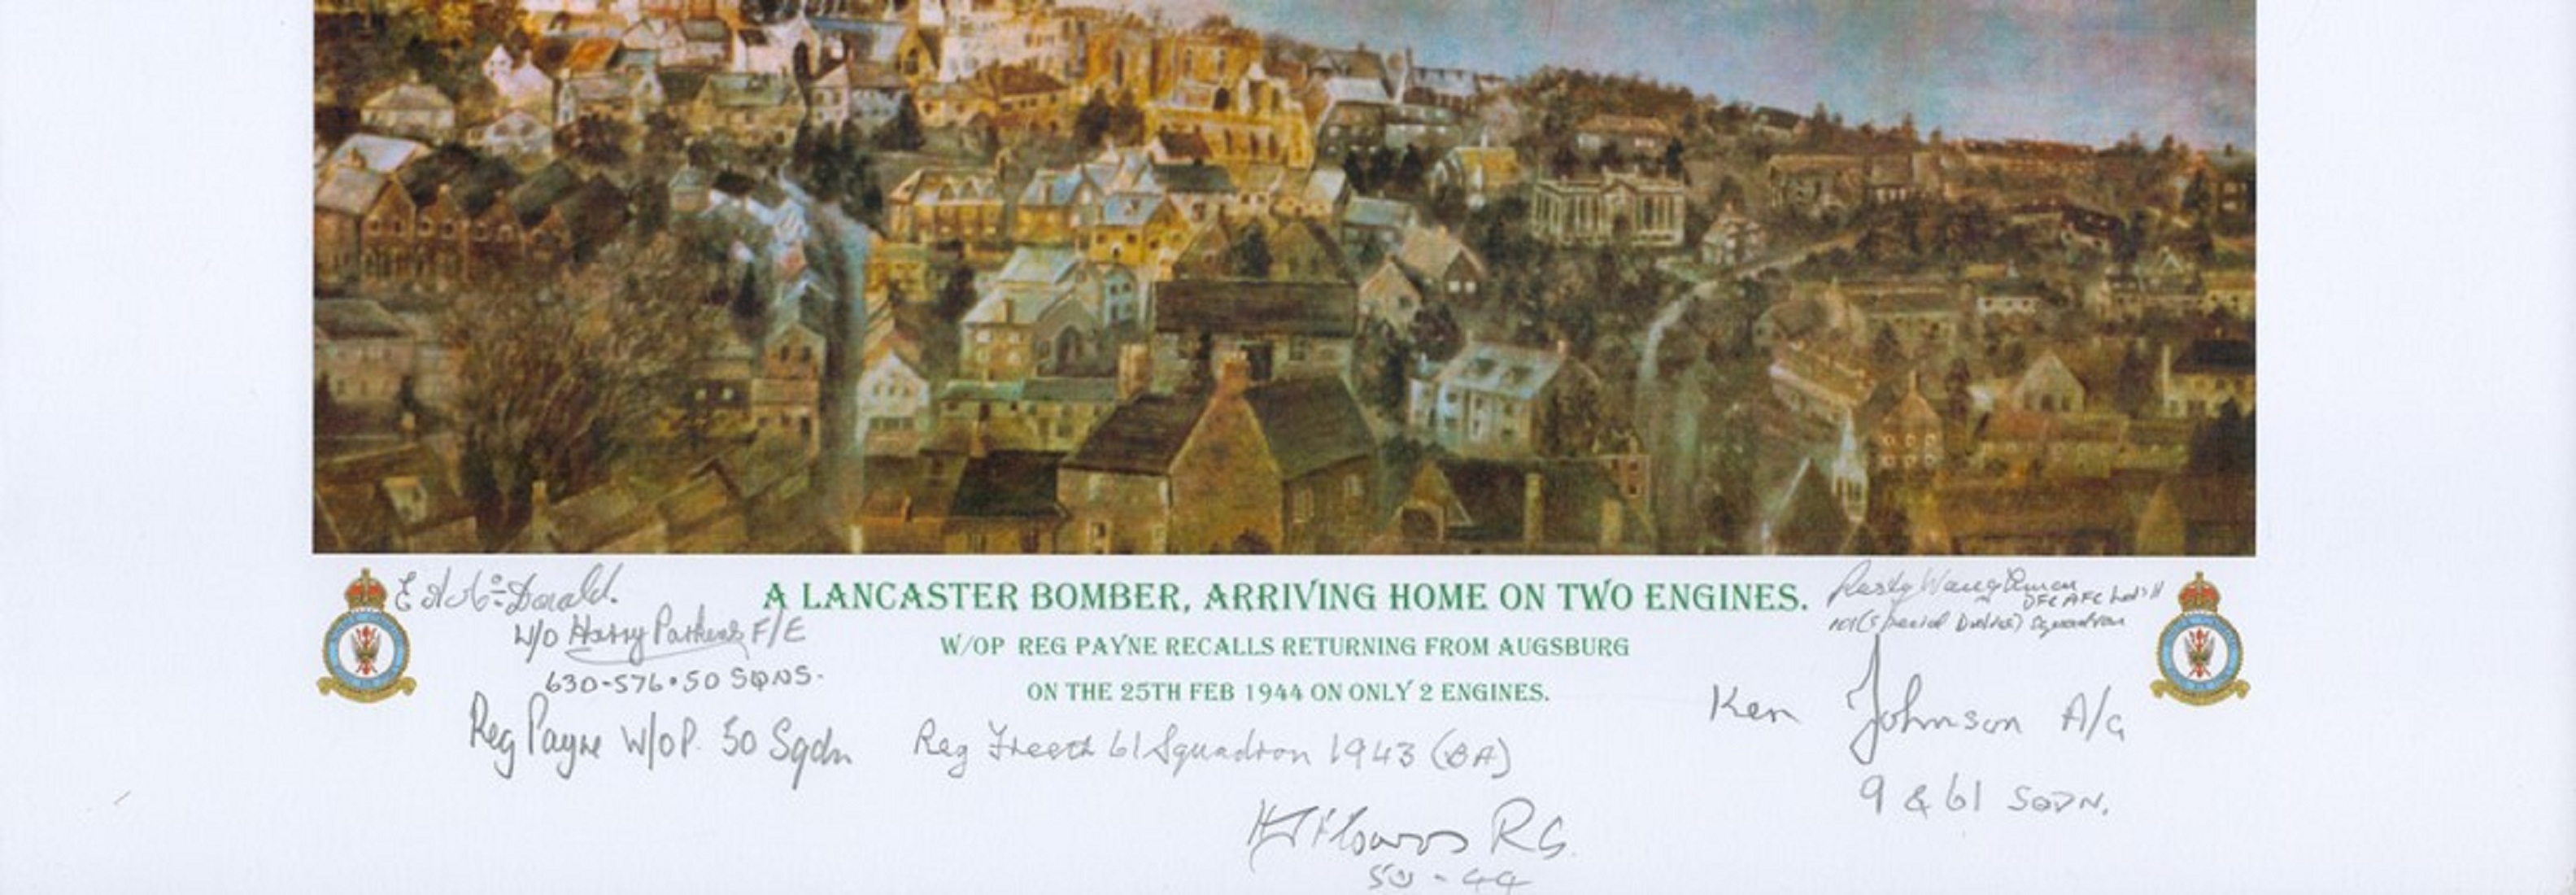 A Lancaster bomber, arriving home on two engines print by Reg Payne. Signed by 6 including Donald, - Image 2 of 2